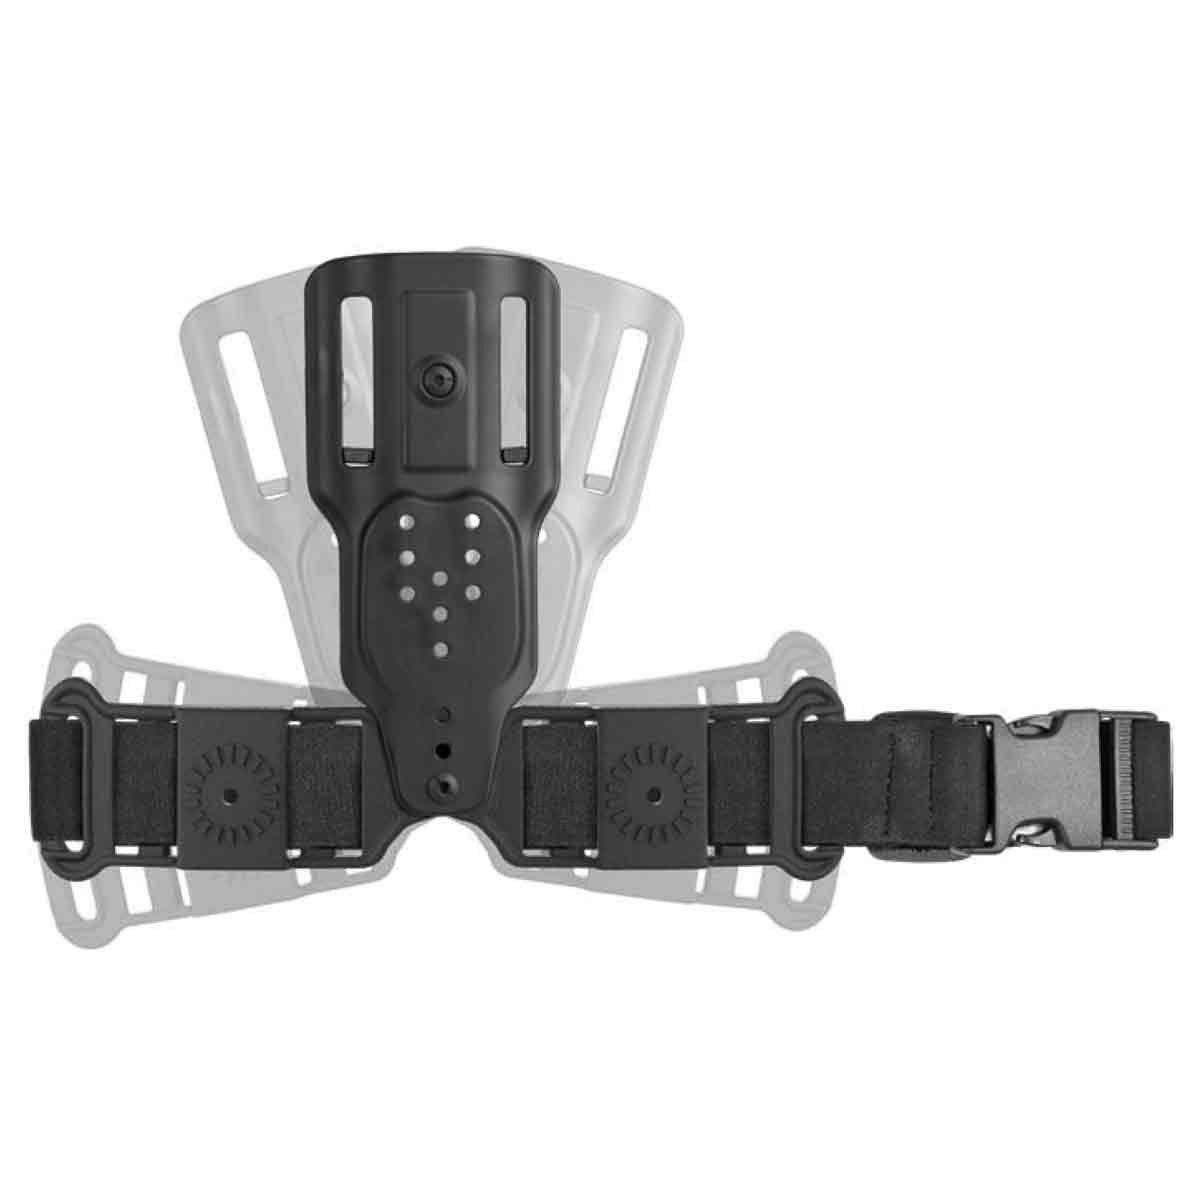 Multi Lenghts flat shape duty belt loop with thigh support